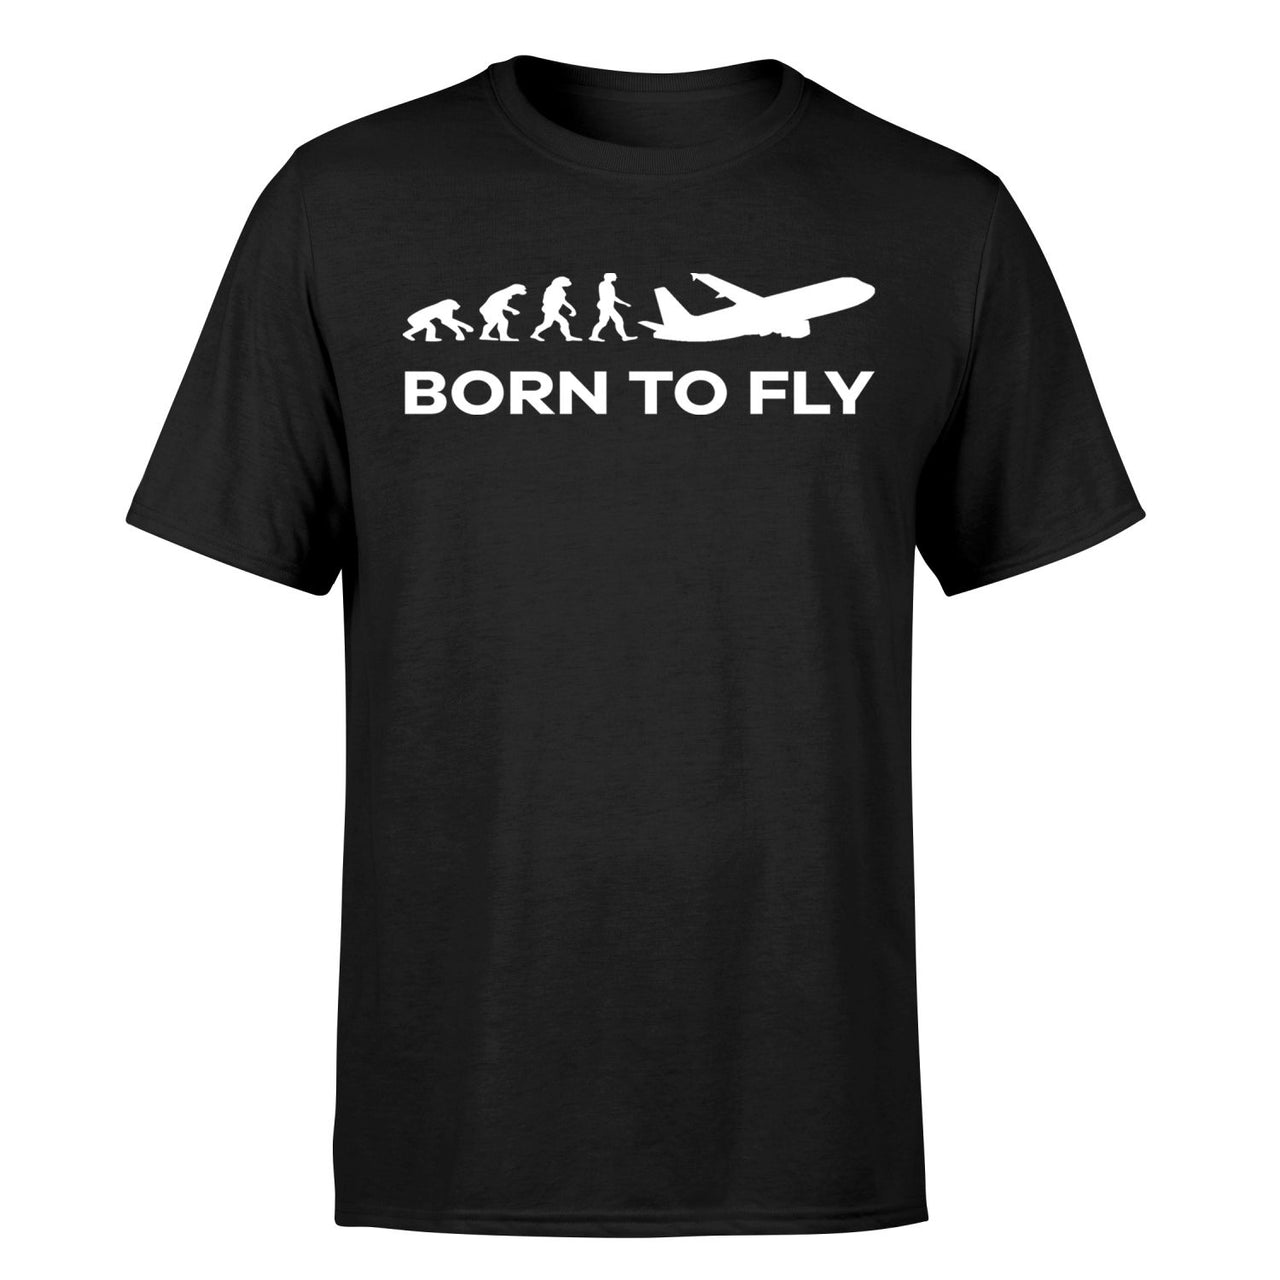 Born To Fly Designed T-Shirts